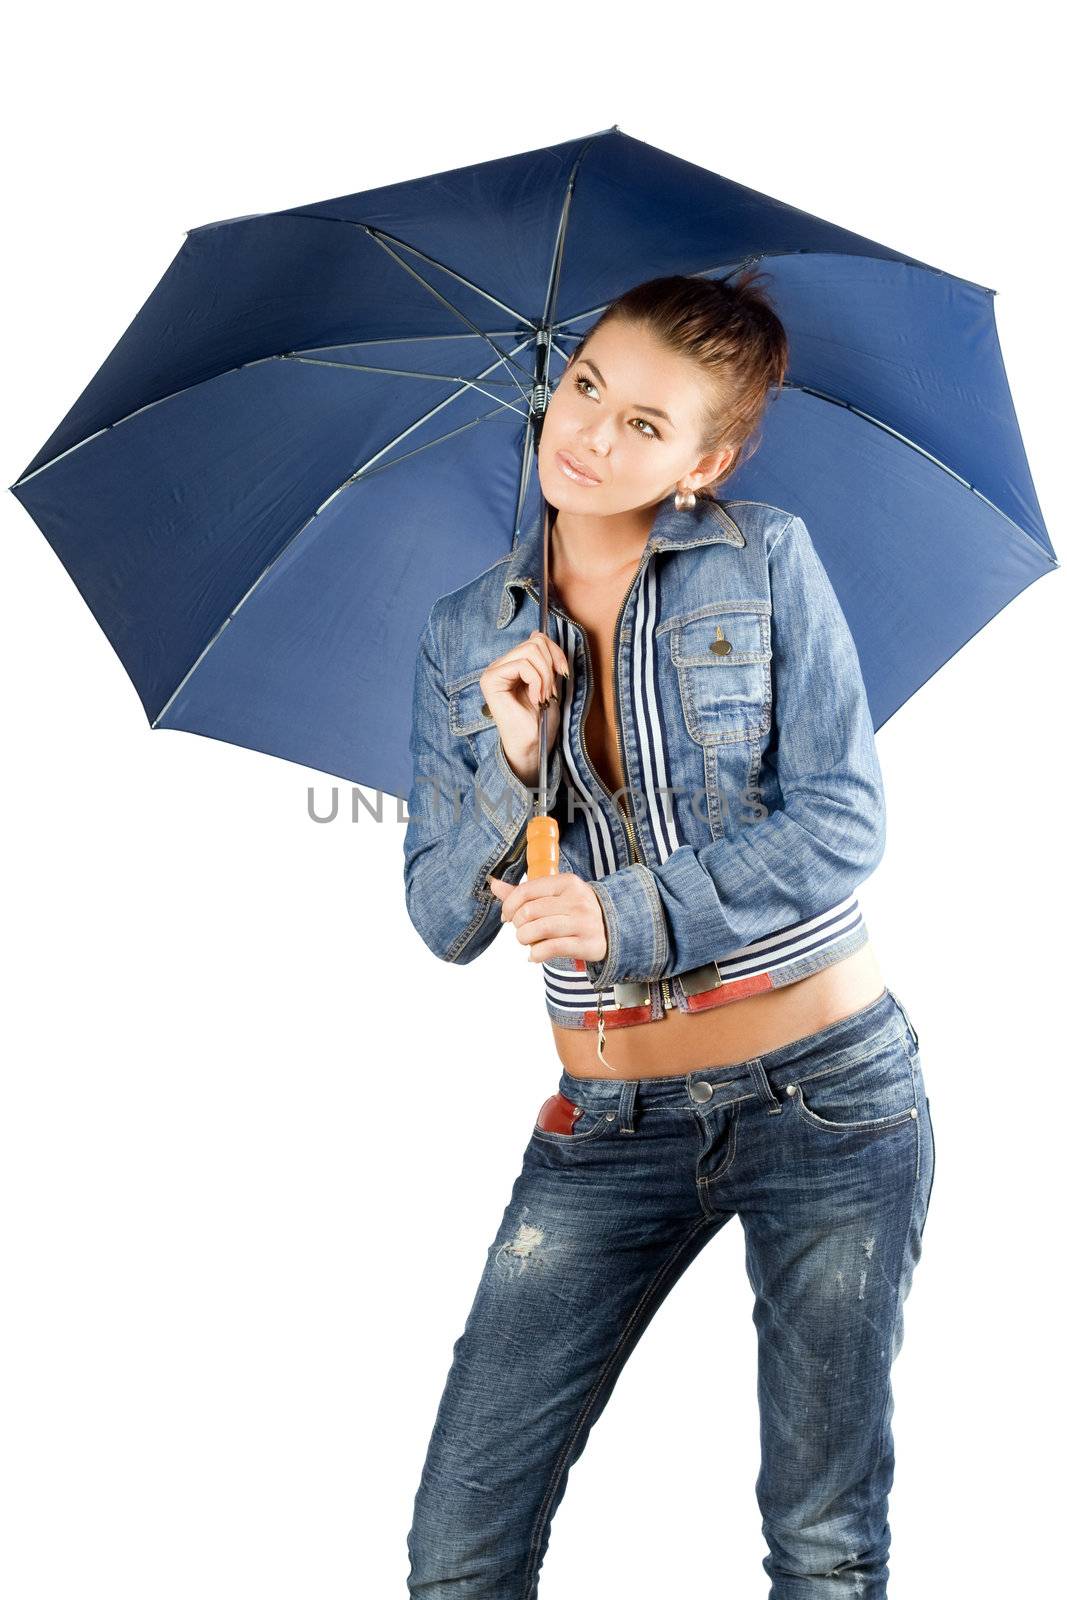 Lovely woman in a denim suit with umbrella